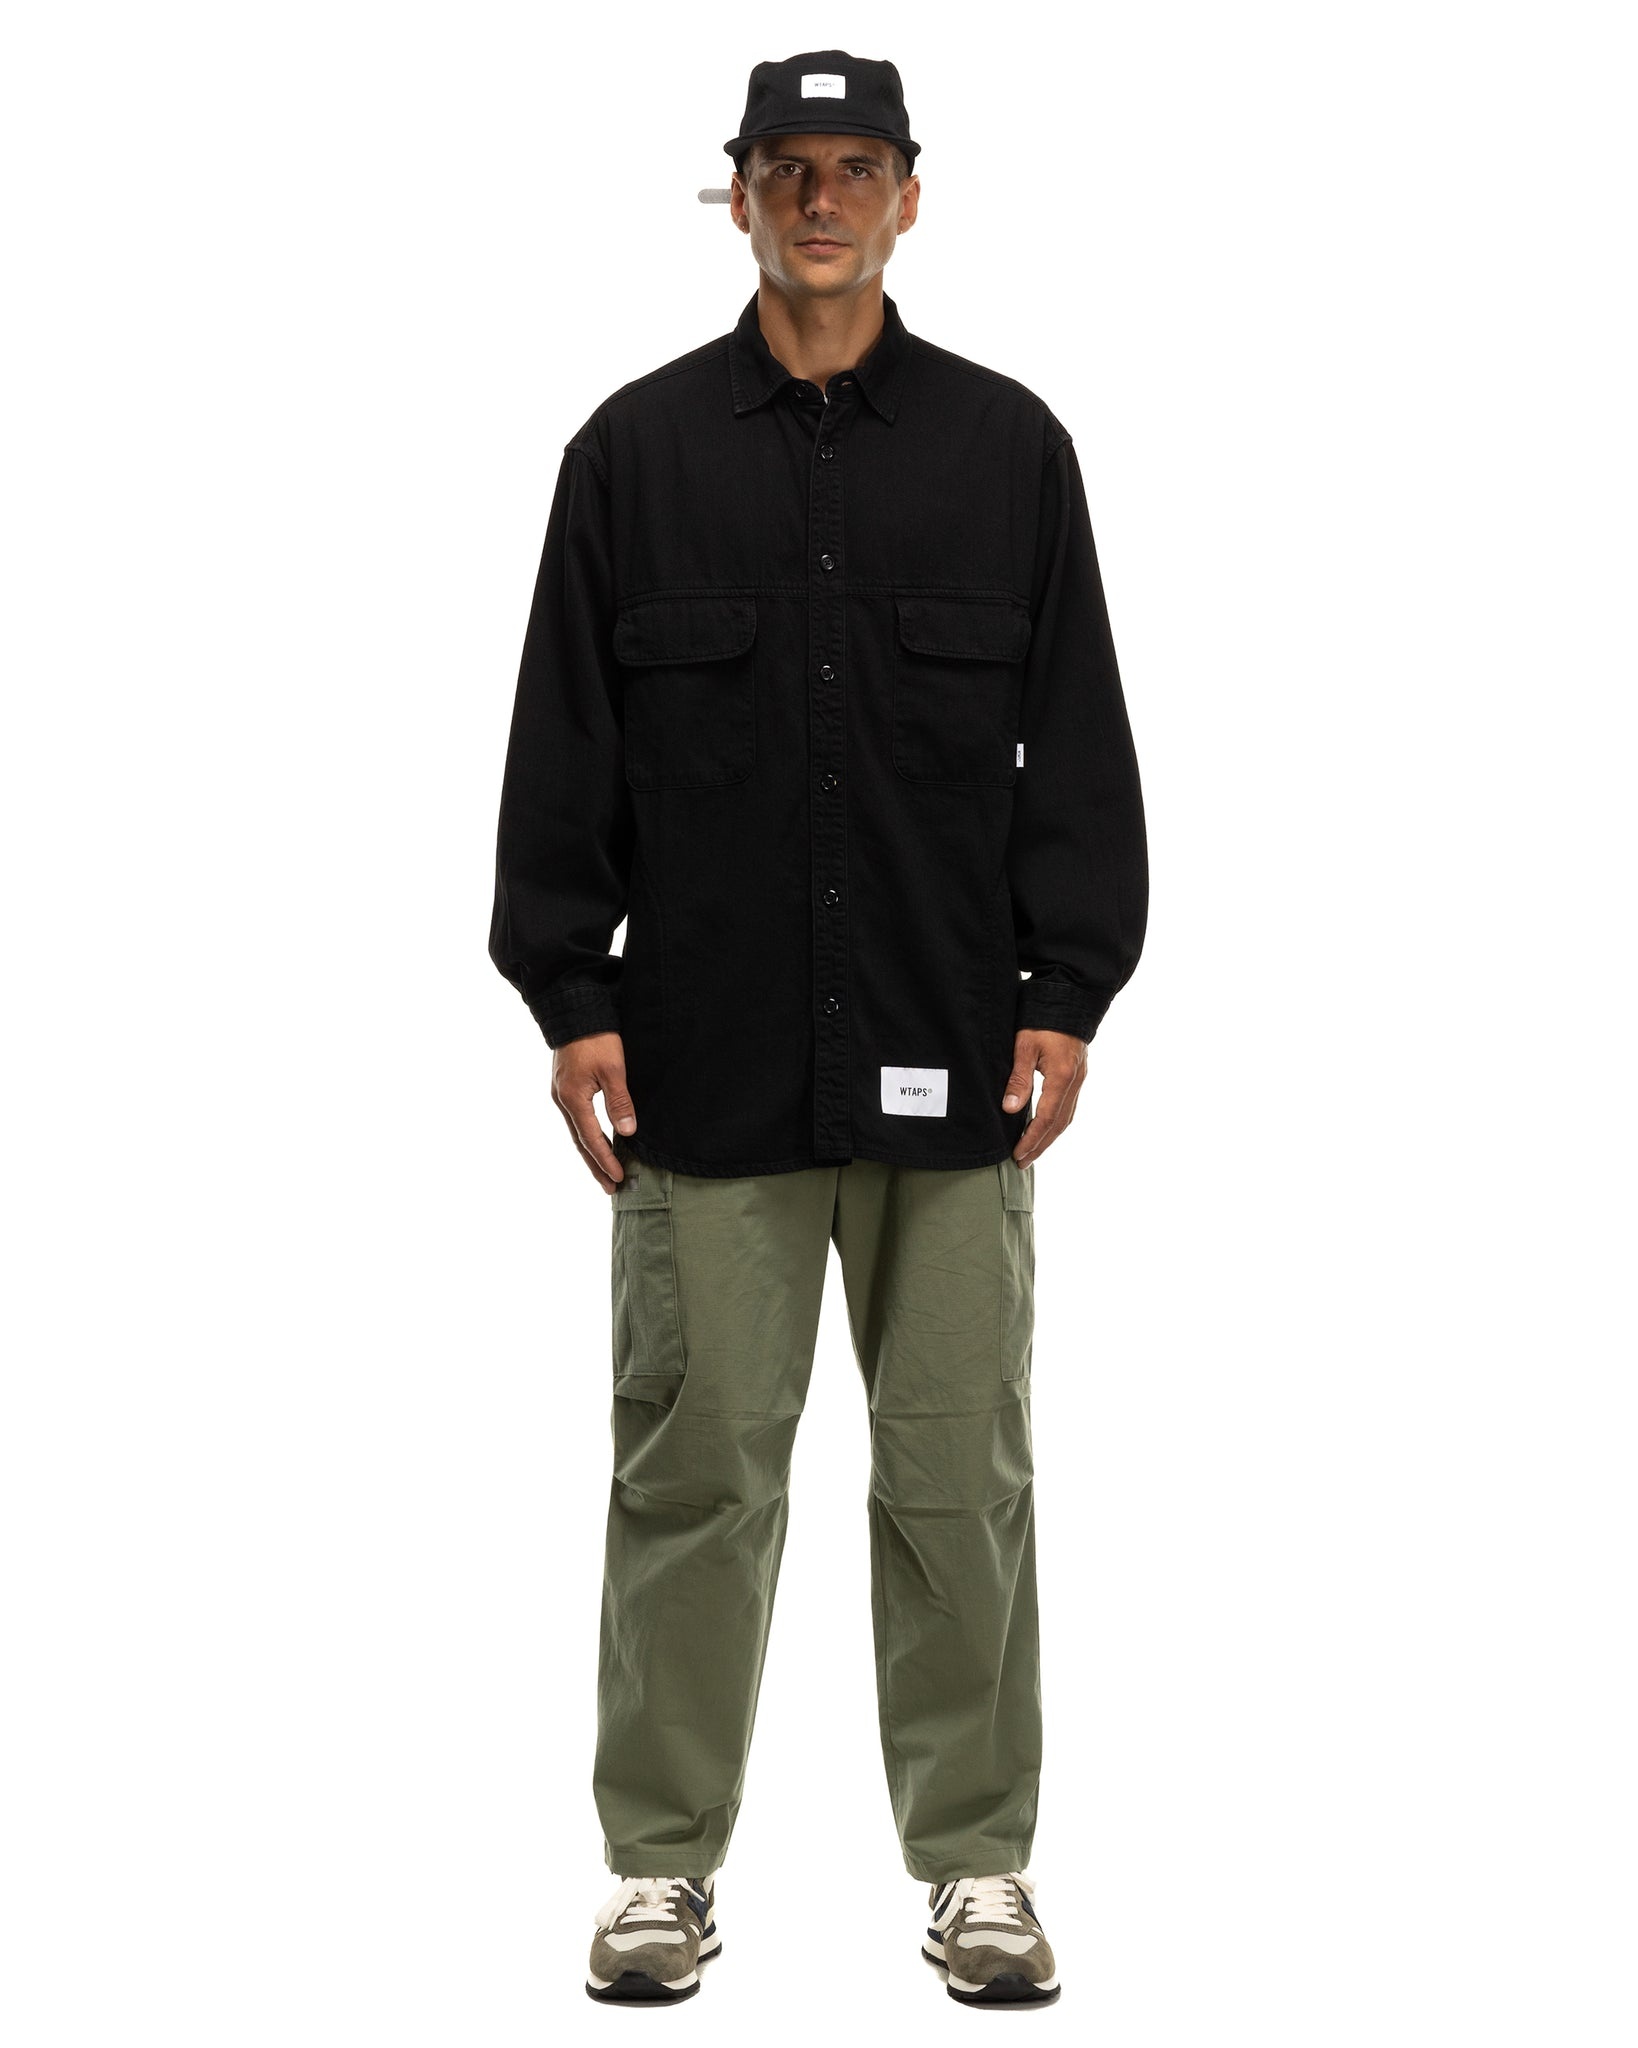 WTAPS MILT9601 / TROUSERS / NYCO. RIPSTOP OLIVE DRAB | REVERSIBLE